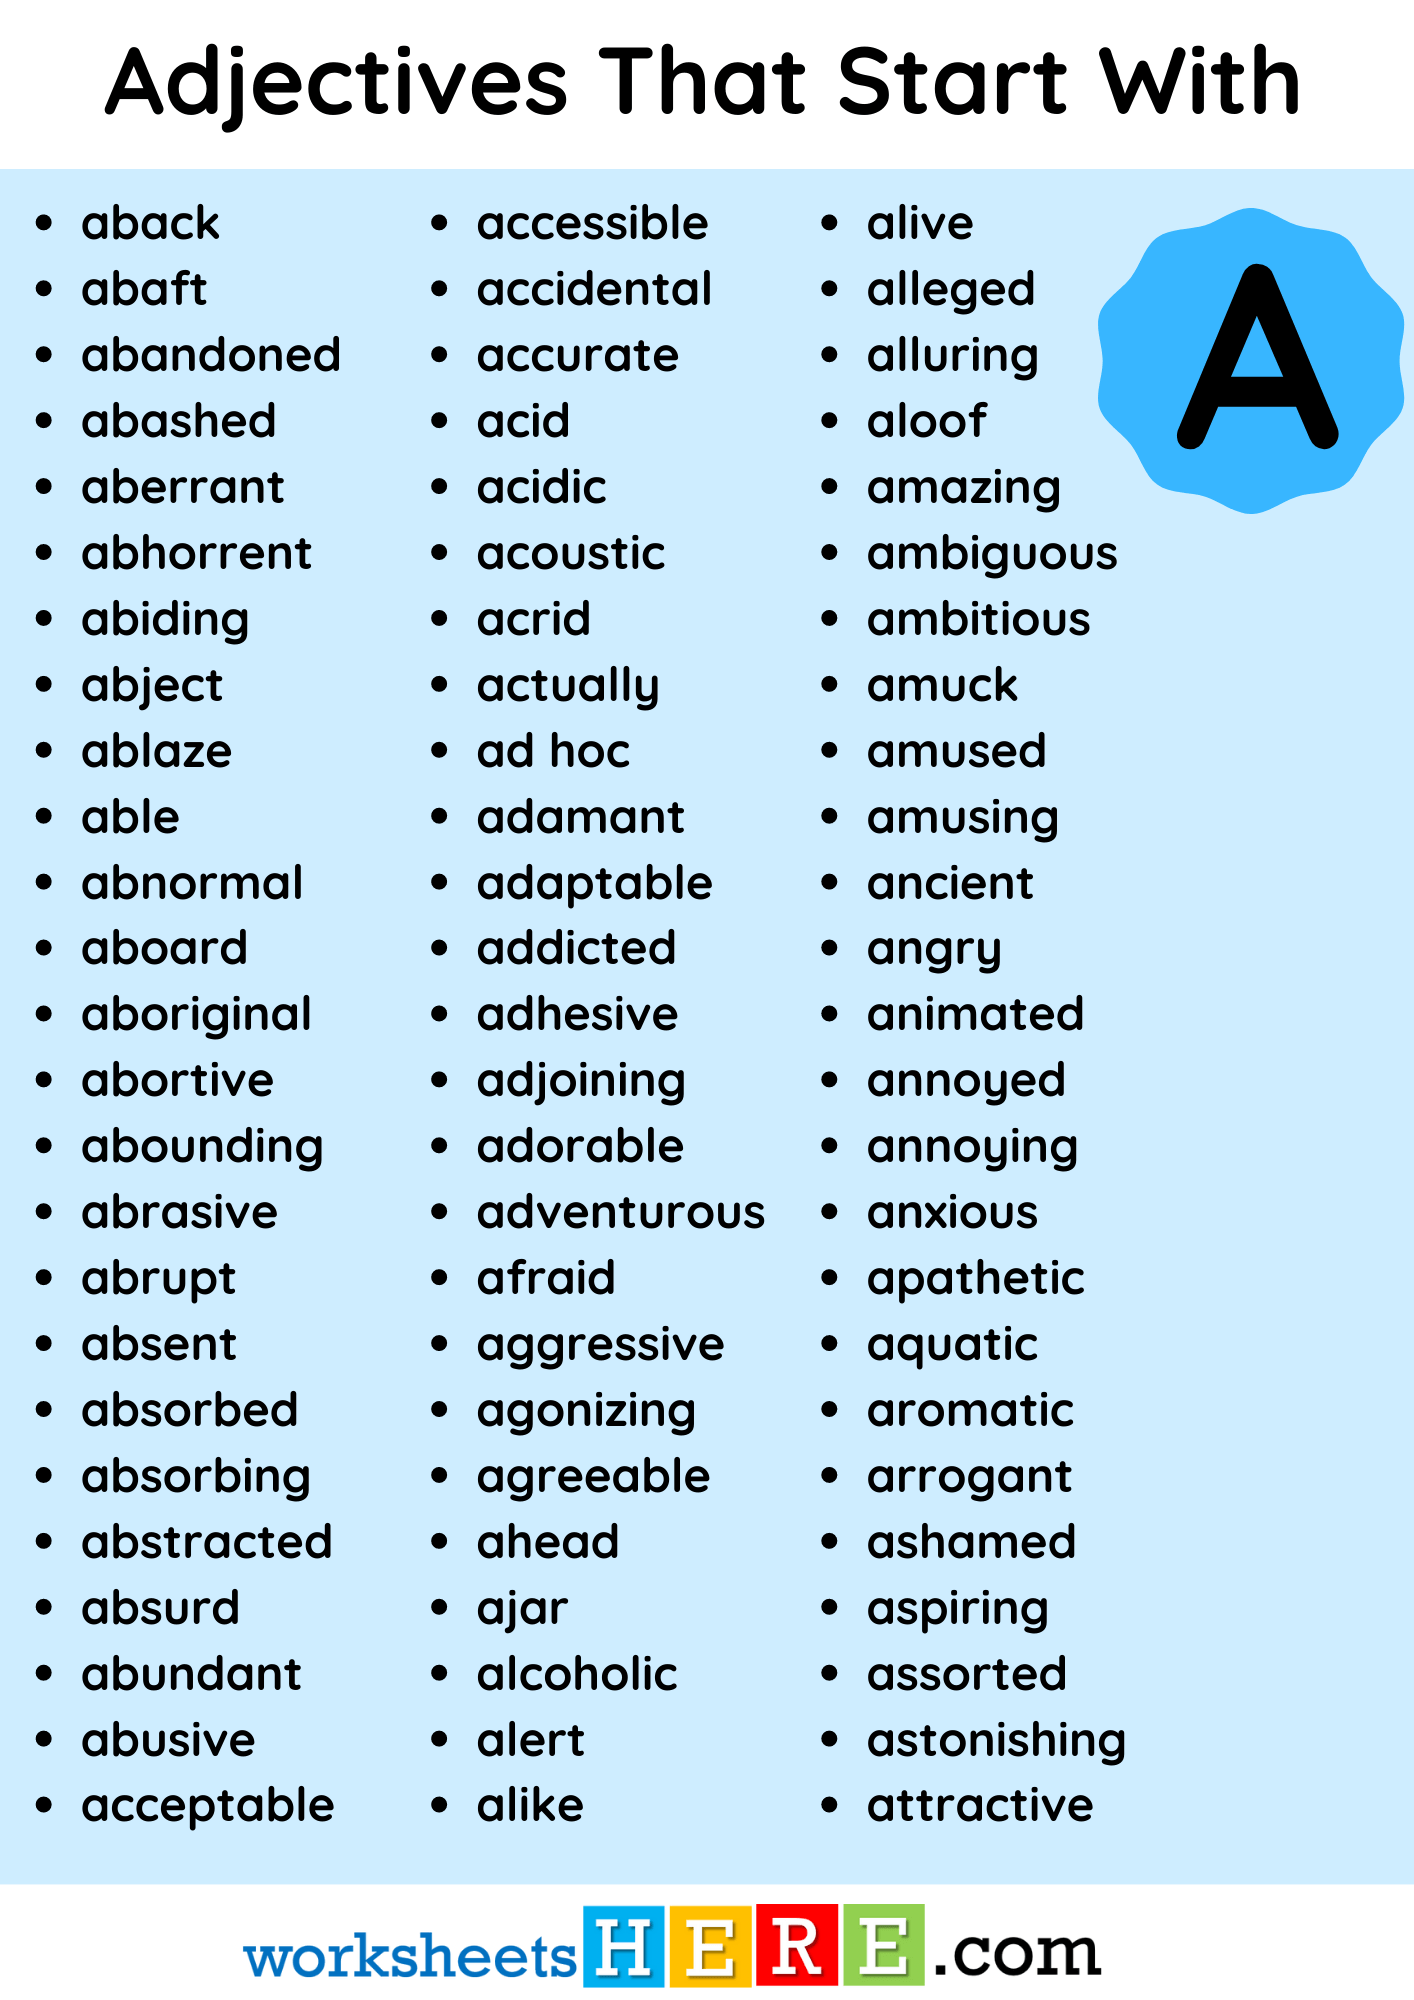 Adjectives That Start With A Vocabulary List PDF Worksheet For Students